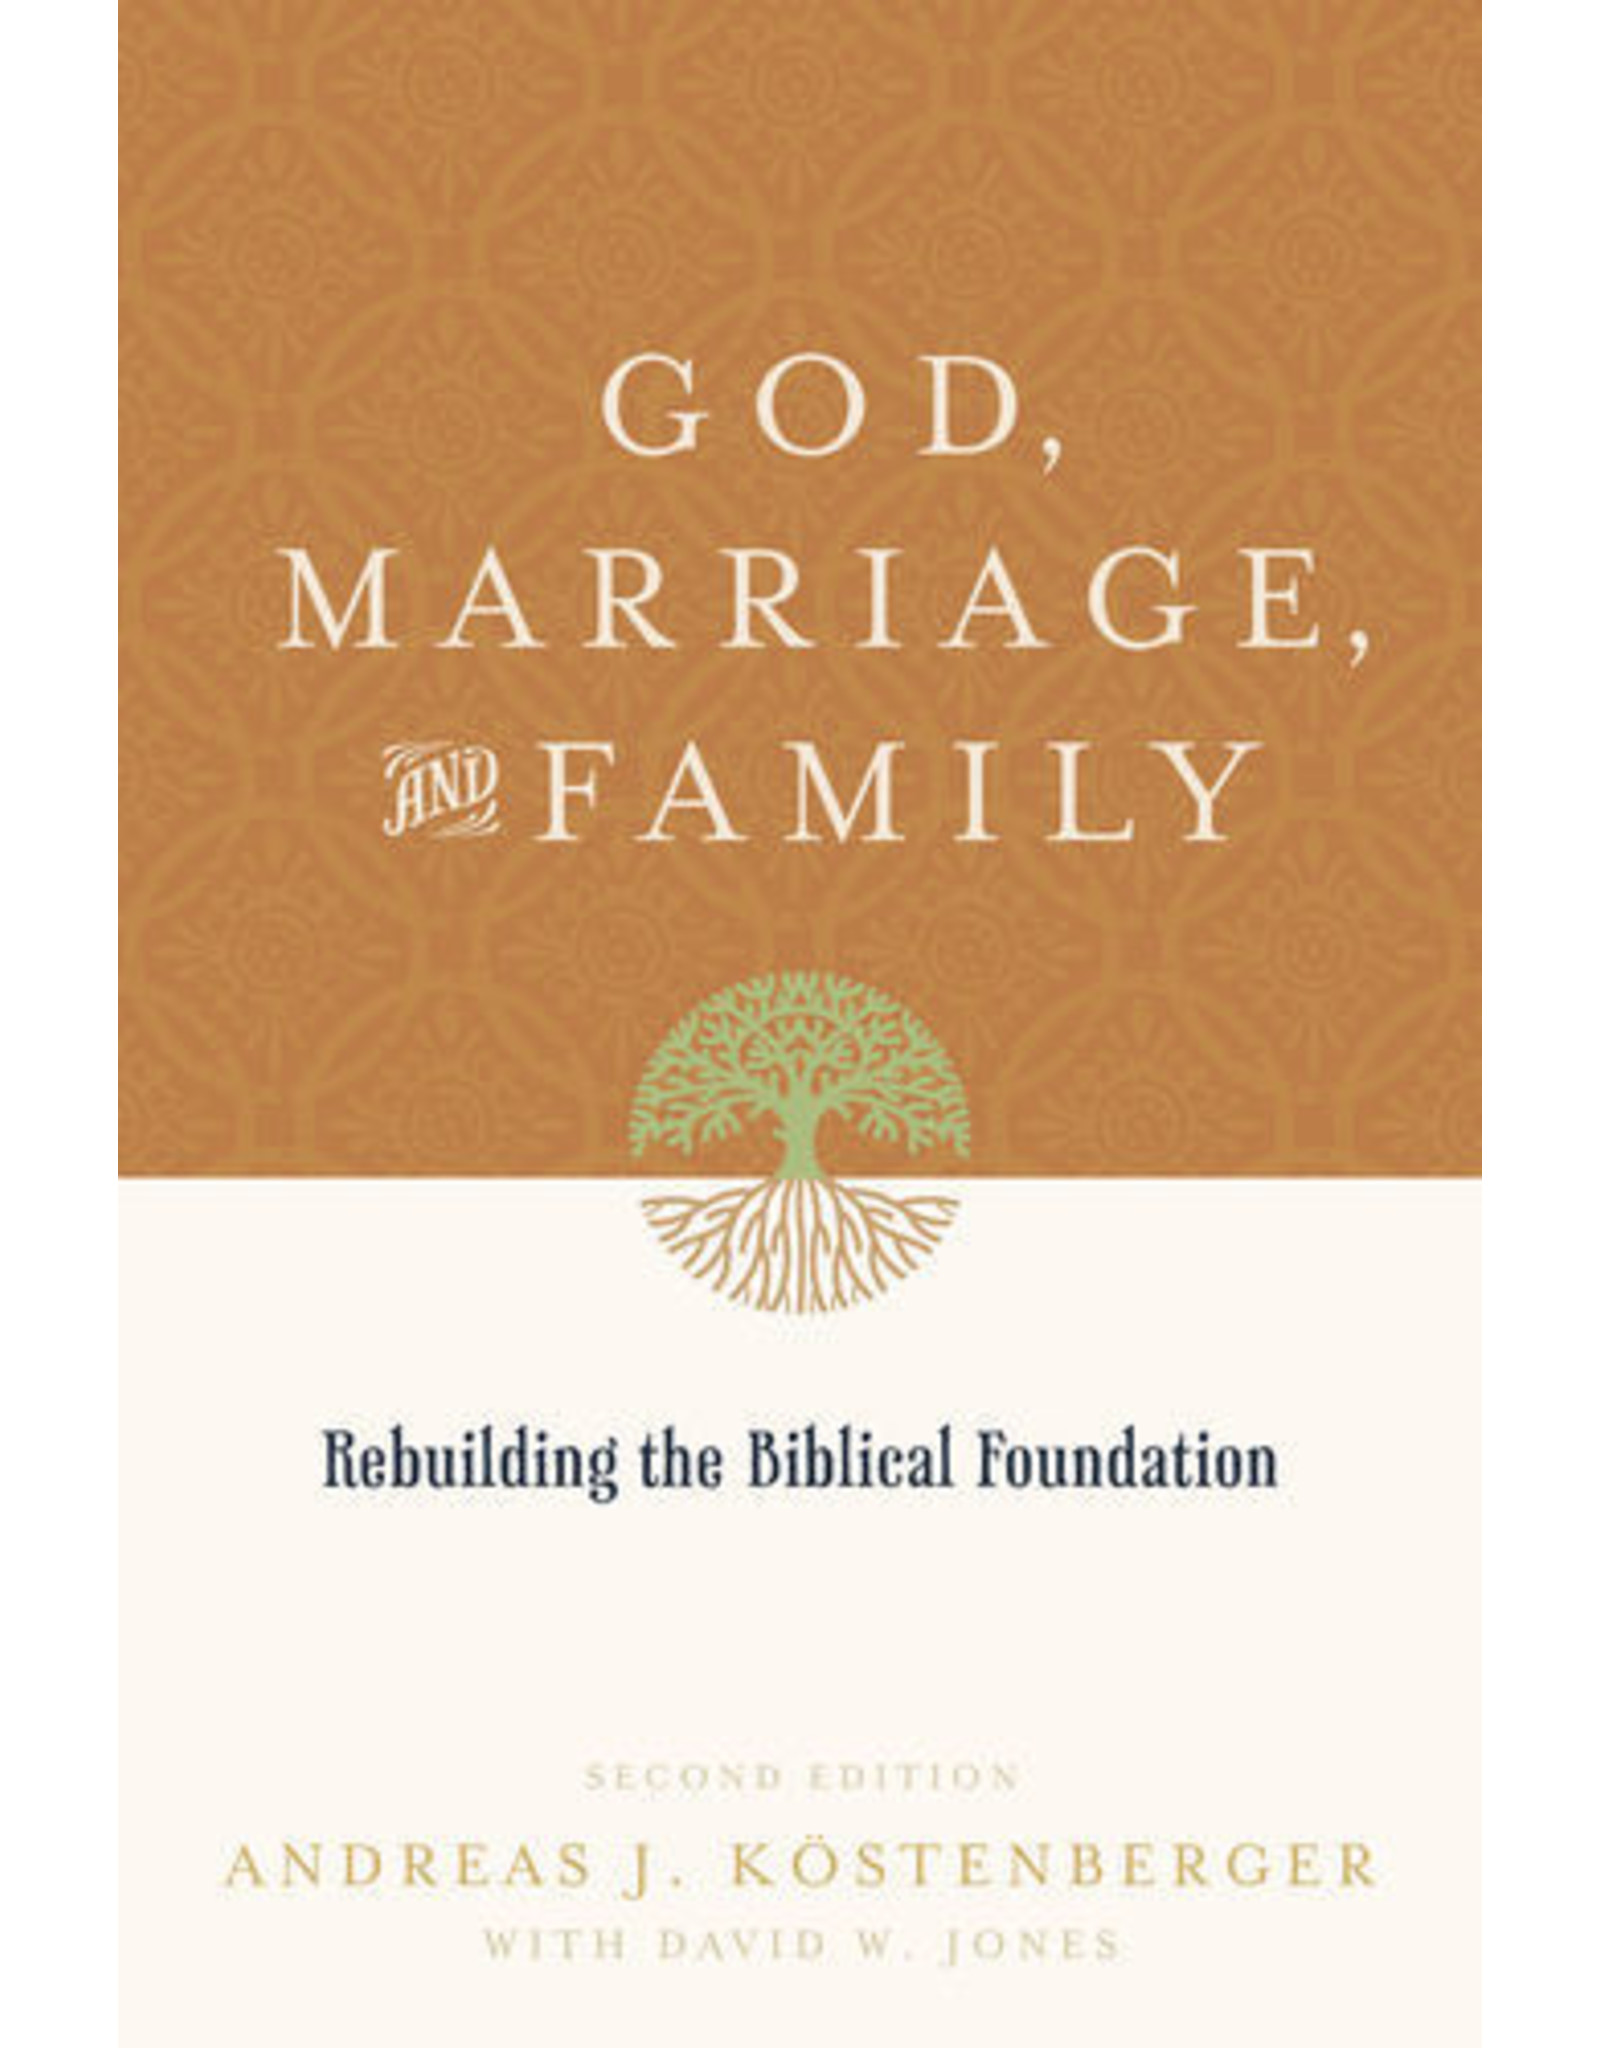 Andreas J Kostenberger & David W Jones God, Marriage and Family